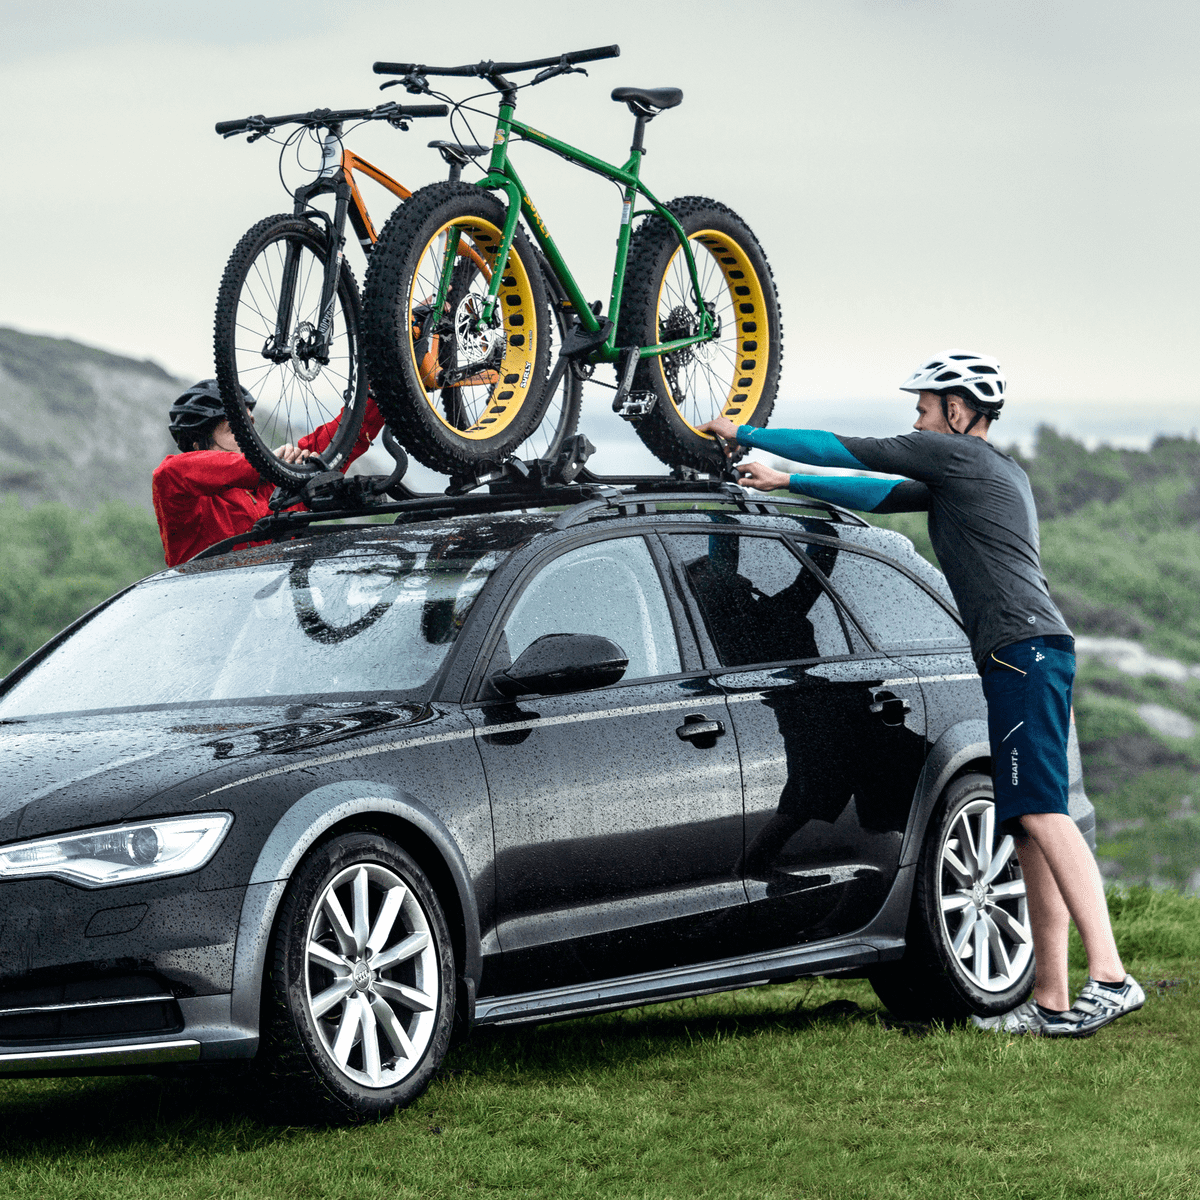 Two cyclists load their bikes onto a roof bike rack using the Thule ProRide Fatbike Adapter .